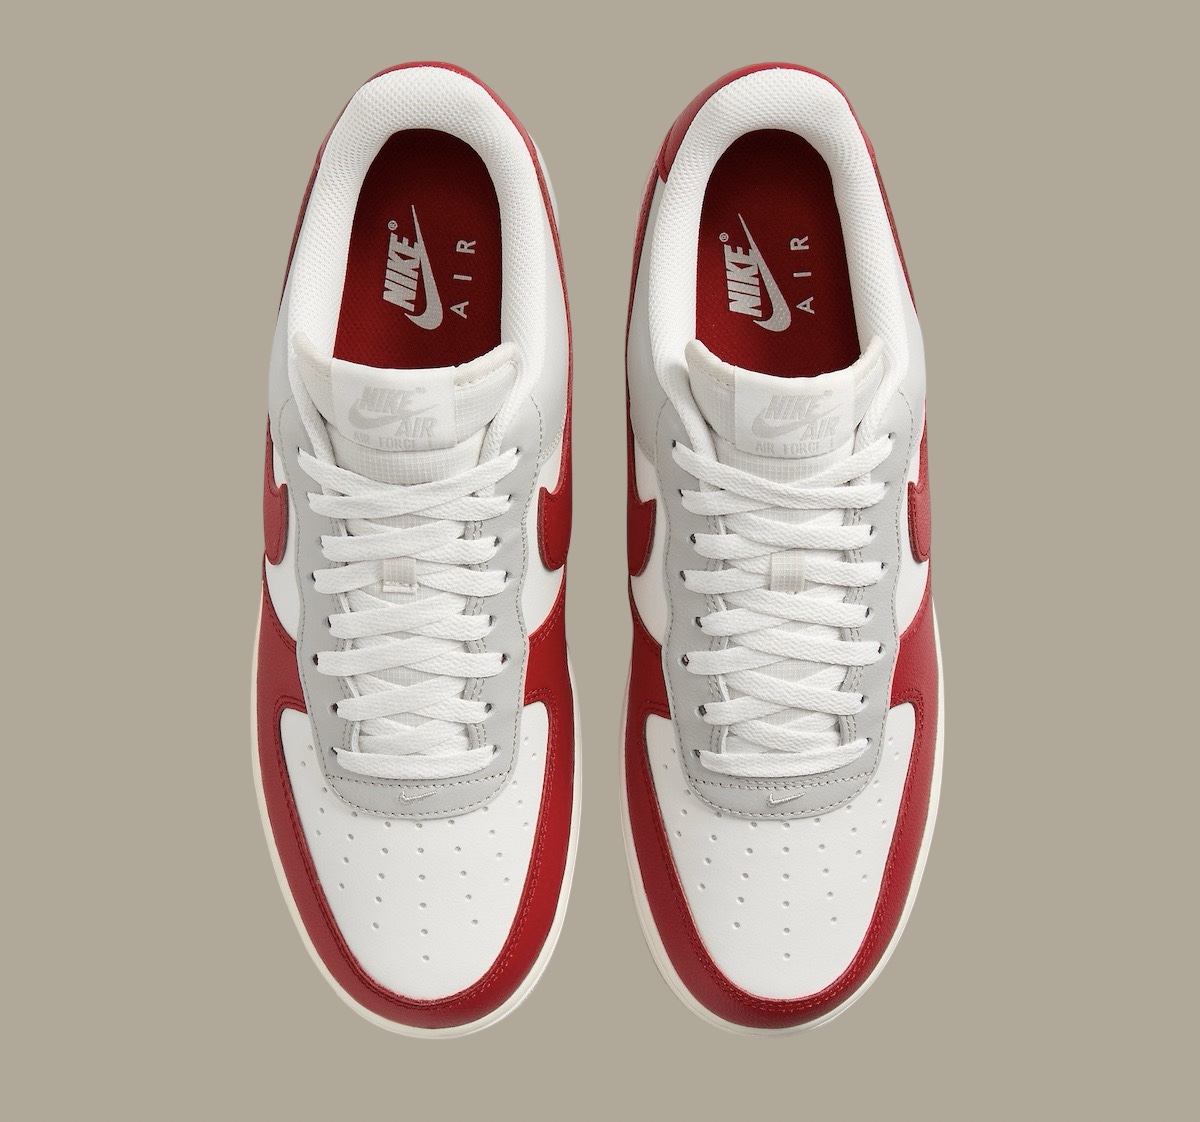 Nike Air Force 1 Low Red Toe HJ9094 012 3